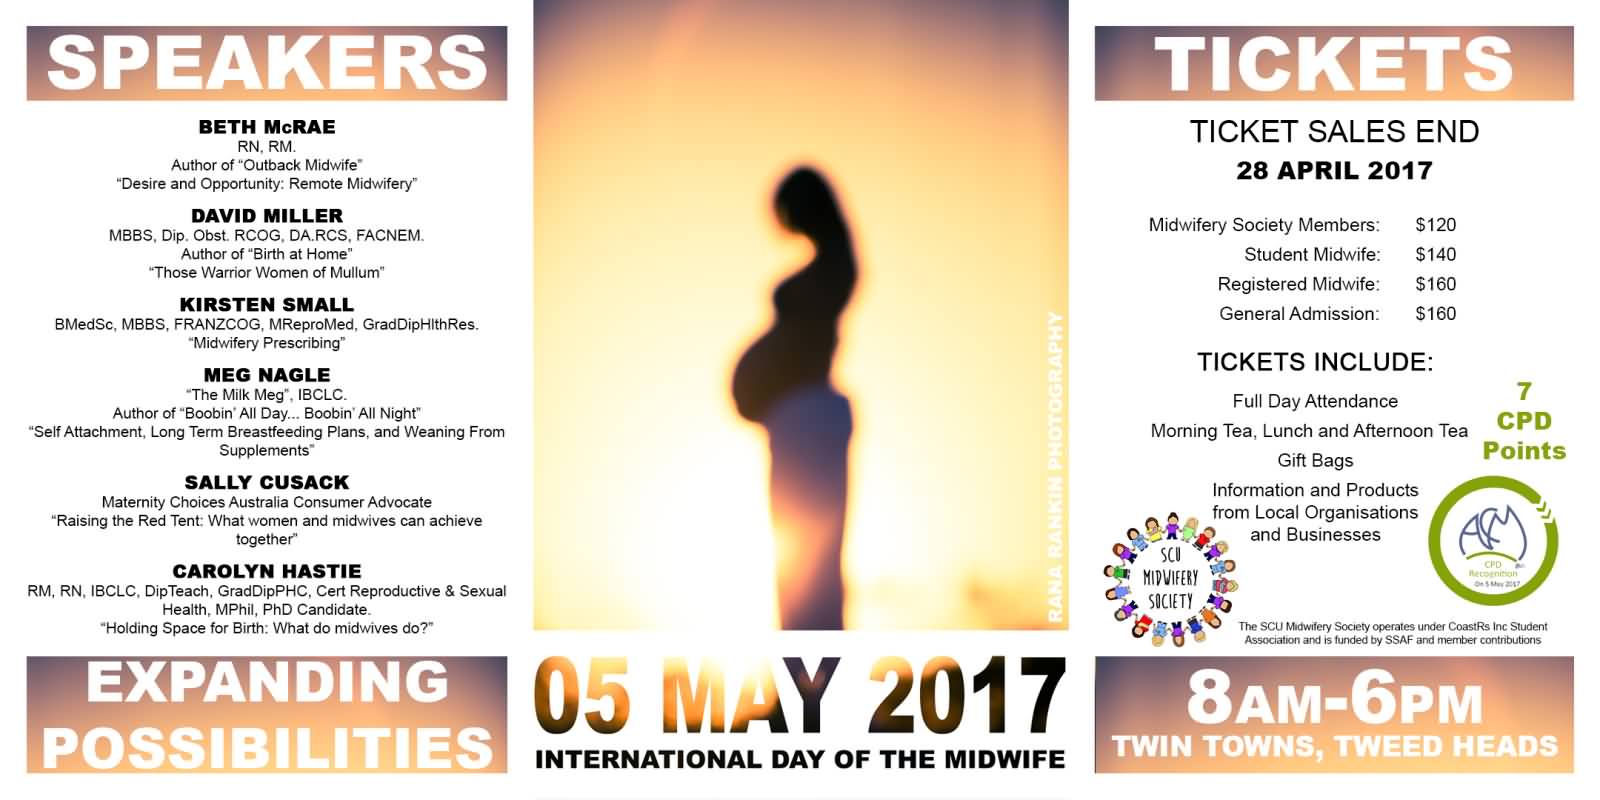 5 May 2017 International Day Of The Midwife